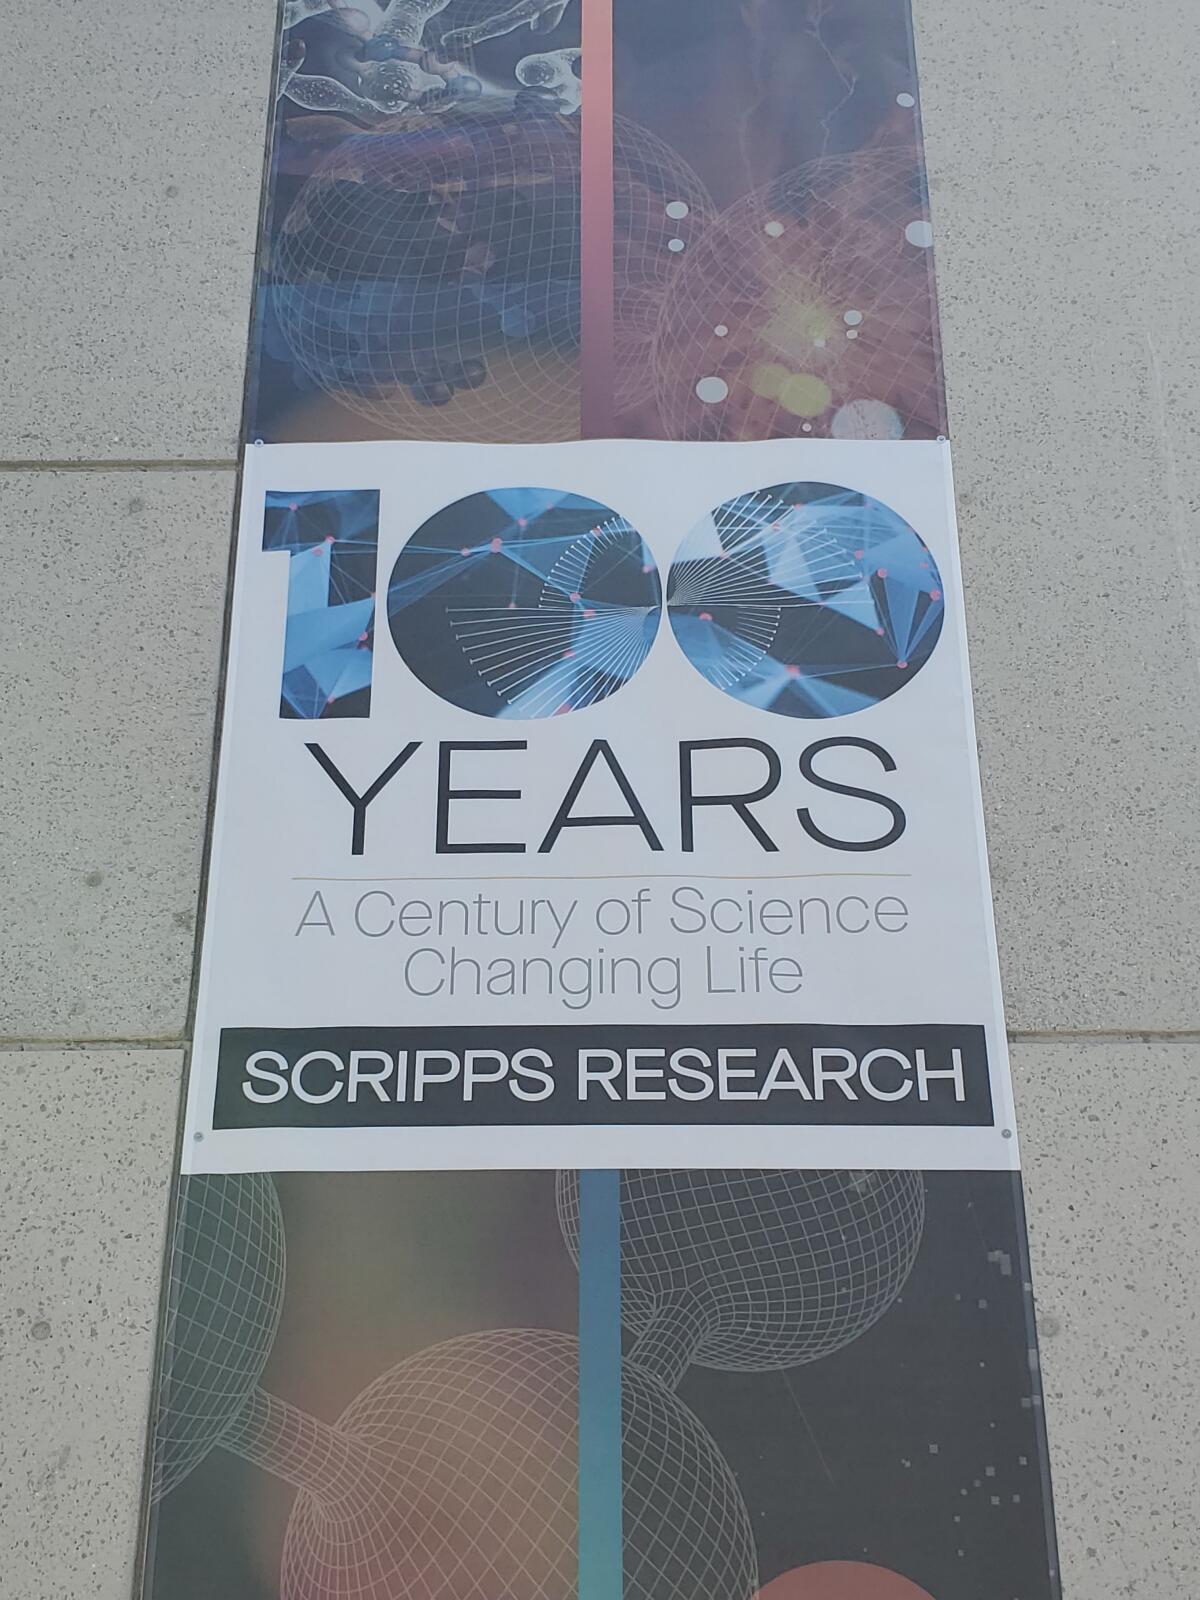 Banners celebrating Scripps Research's 100 years of science hang around the La Jolla campus.